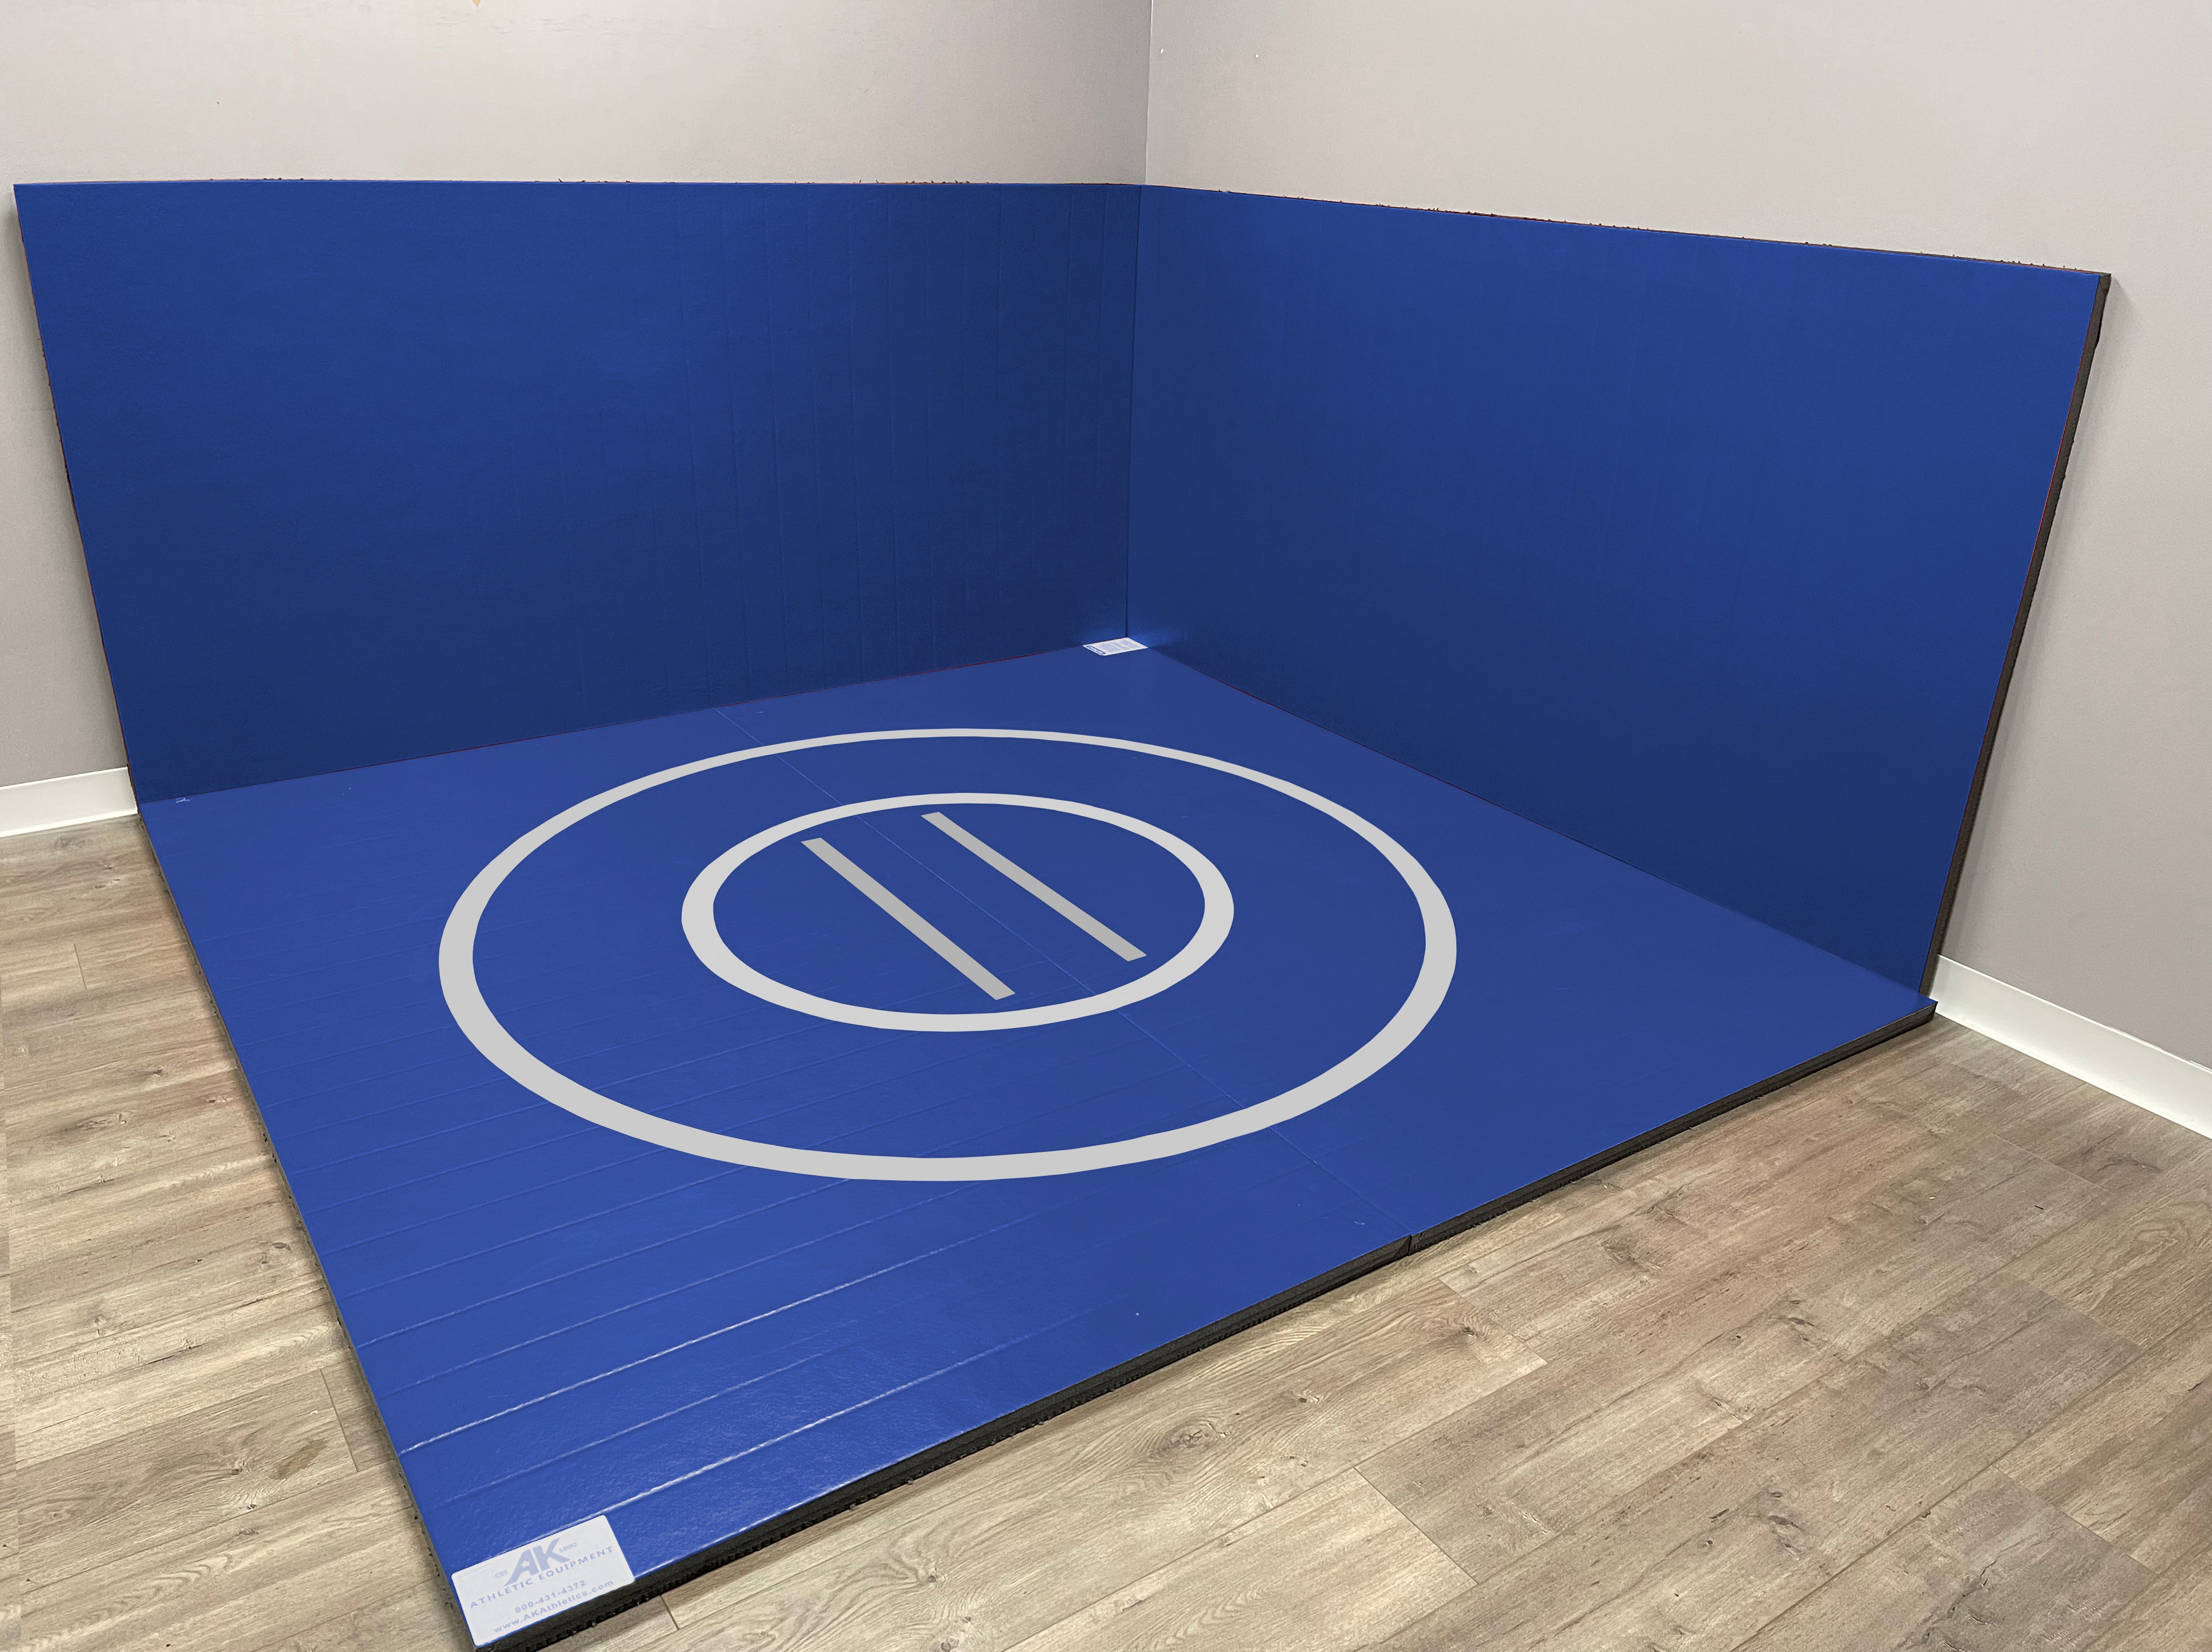 Instant Wrestling Room 12' x 12' wrestling mat and Removable Roll Up Wall Pads Package